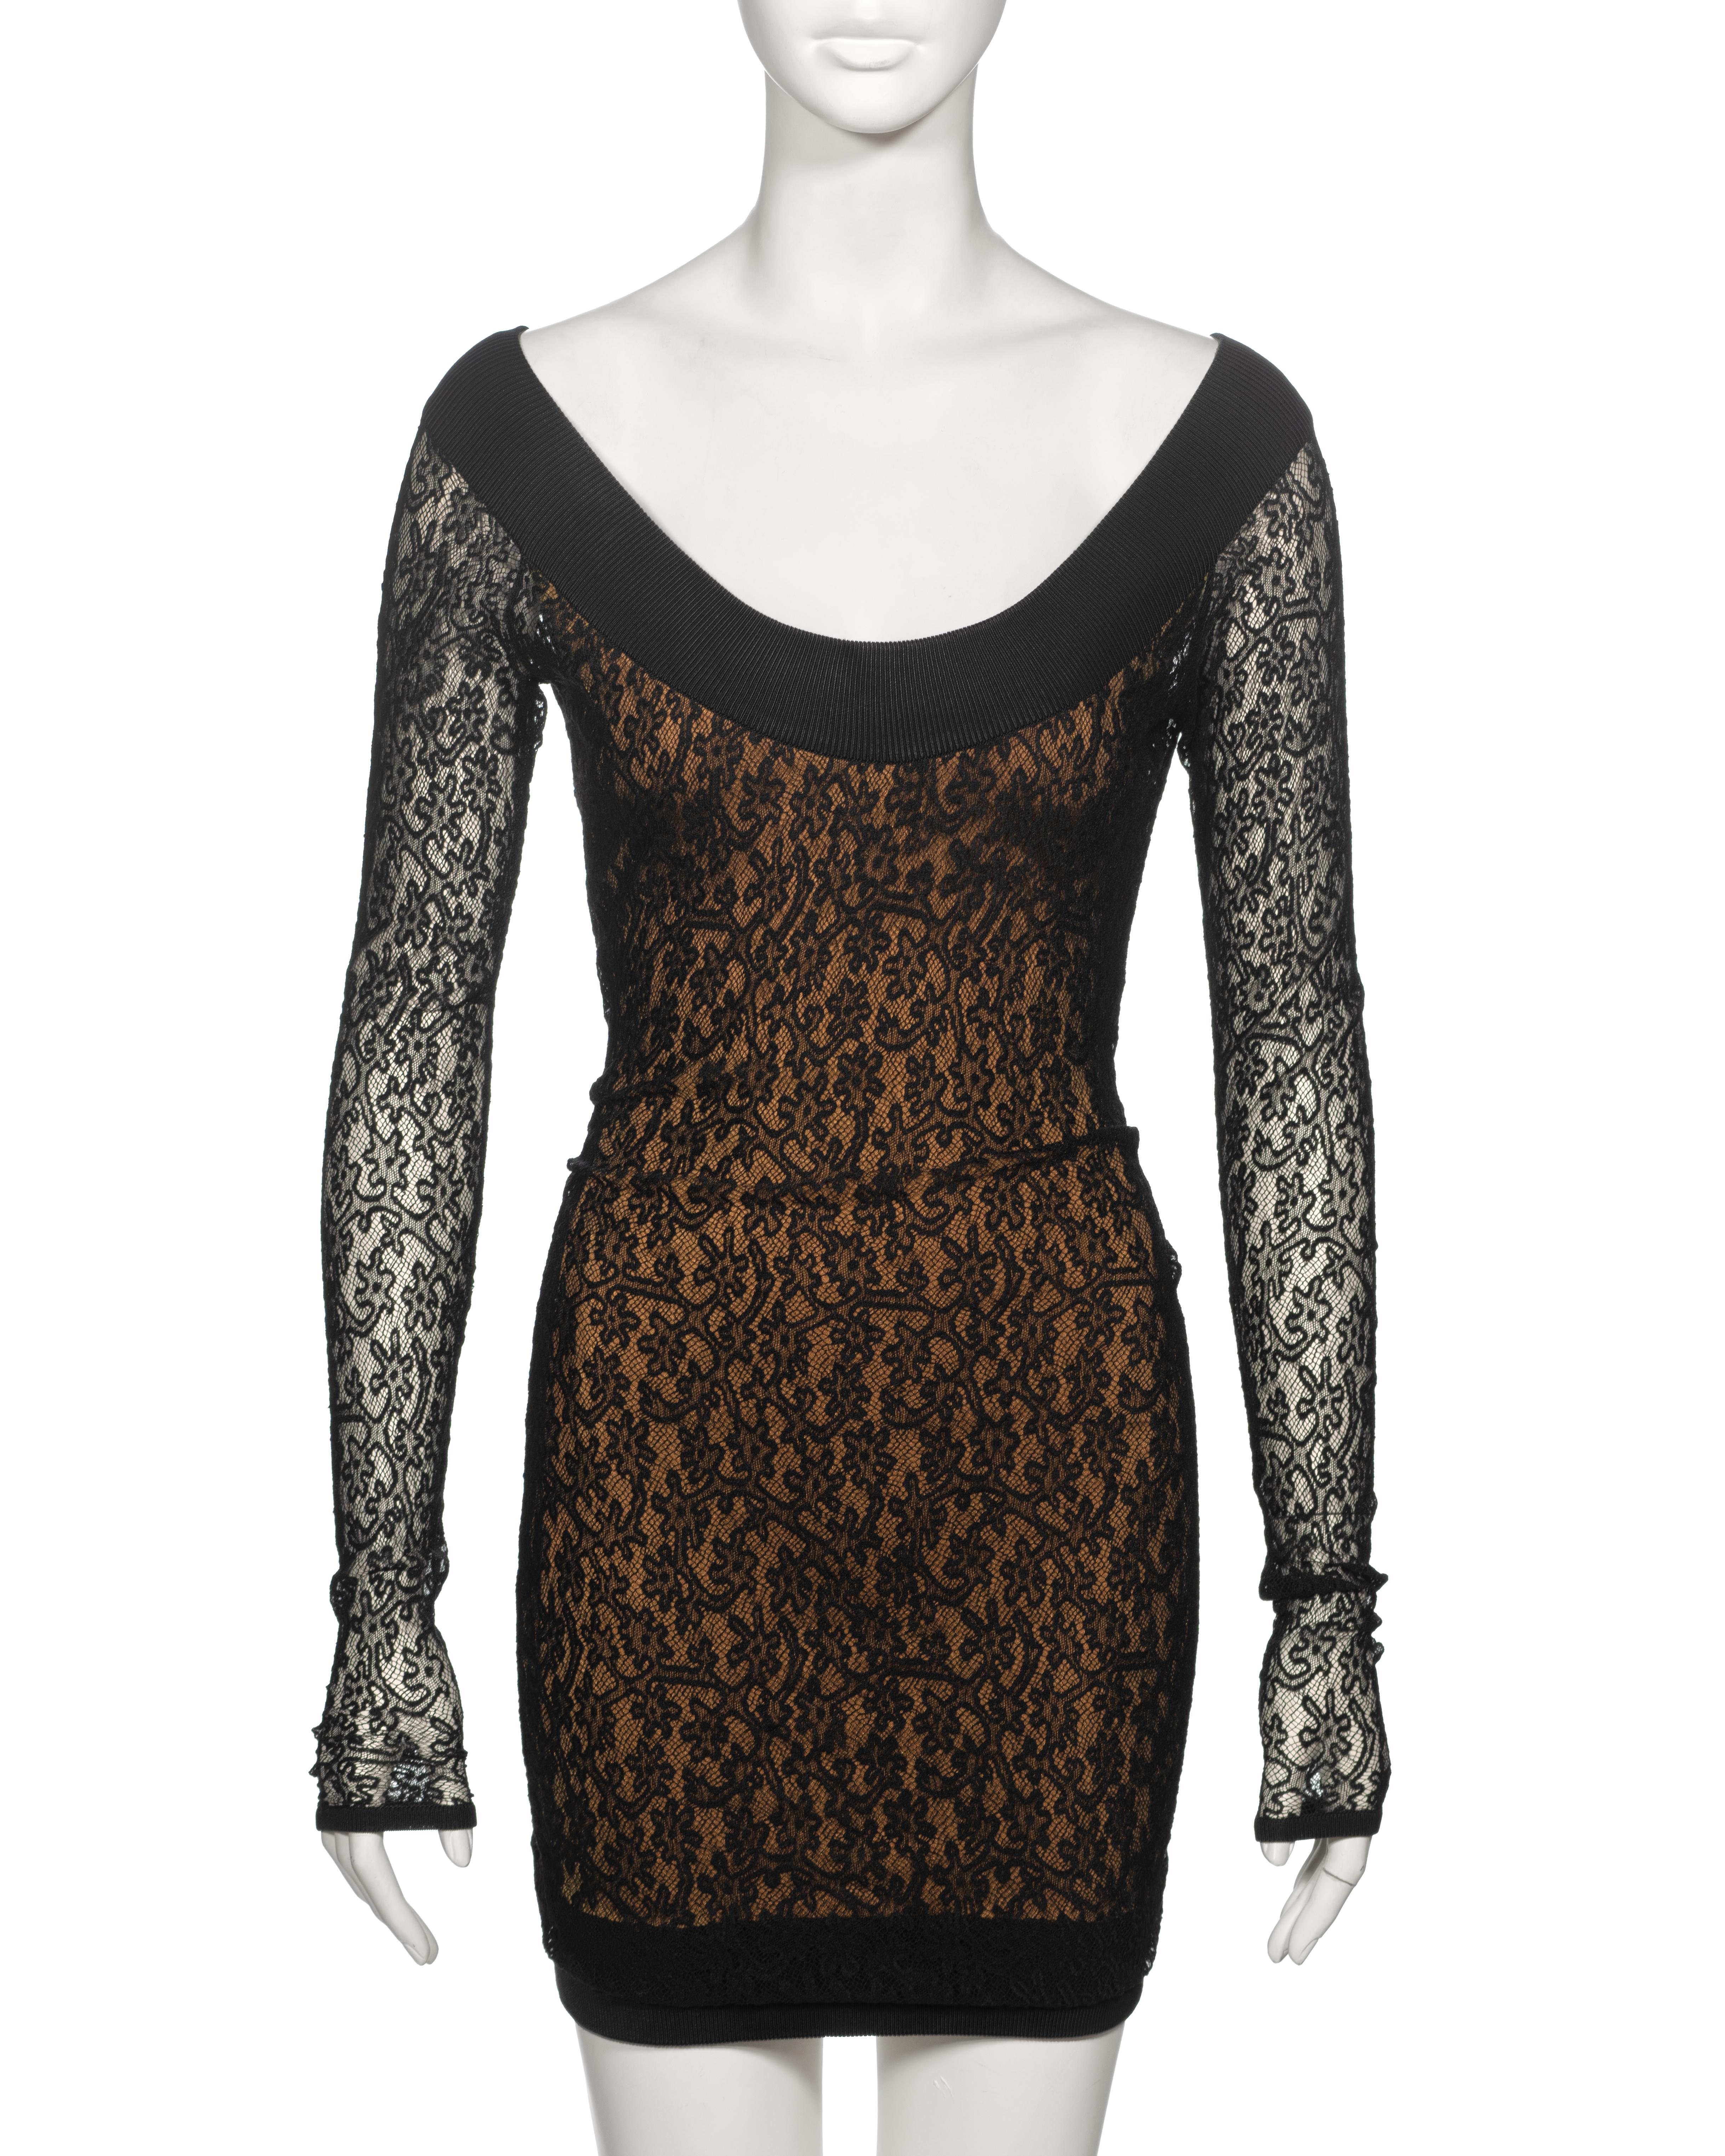 Azzedine Alaia Black Floral Stretch Lace Mini Dress, fw 1990 In Good Condition For Sale In London, GB